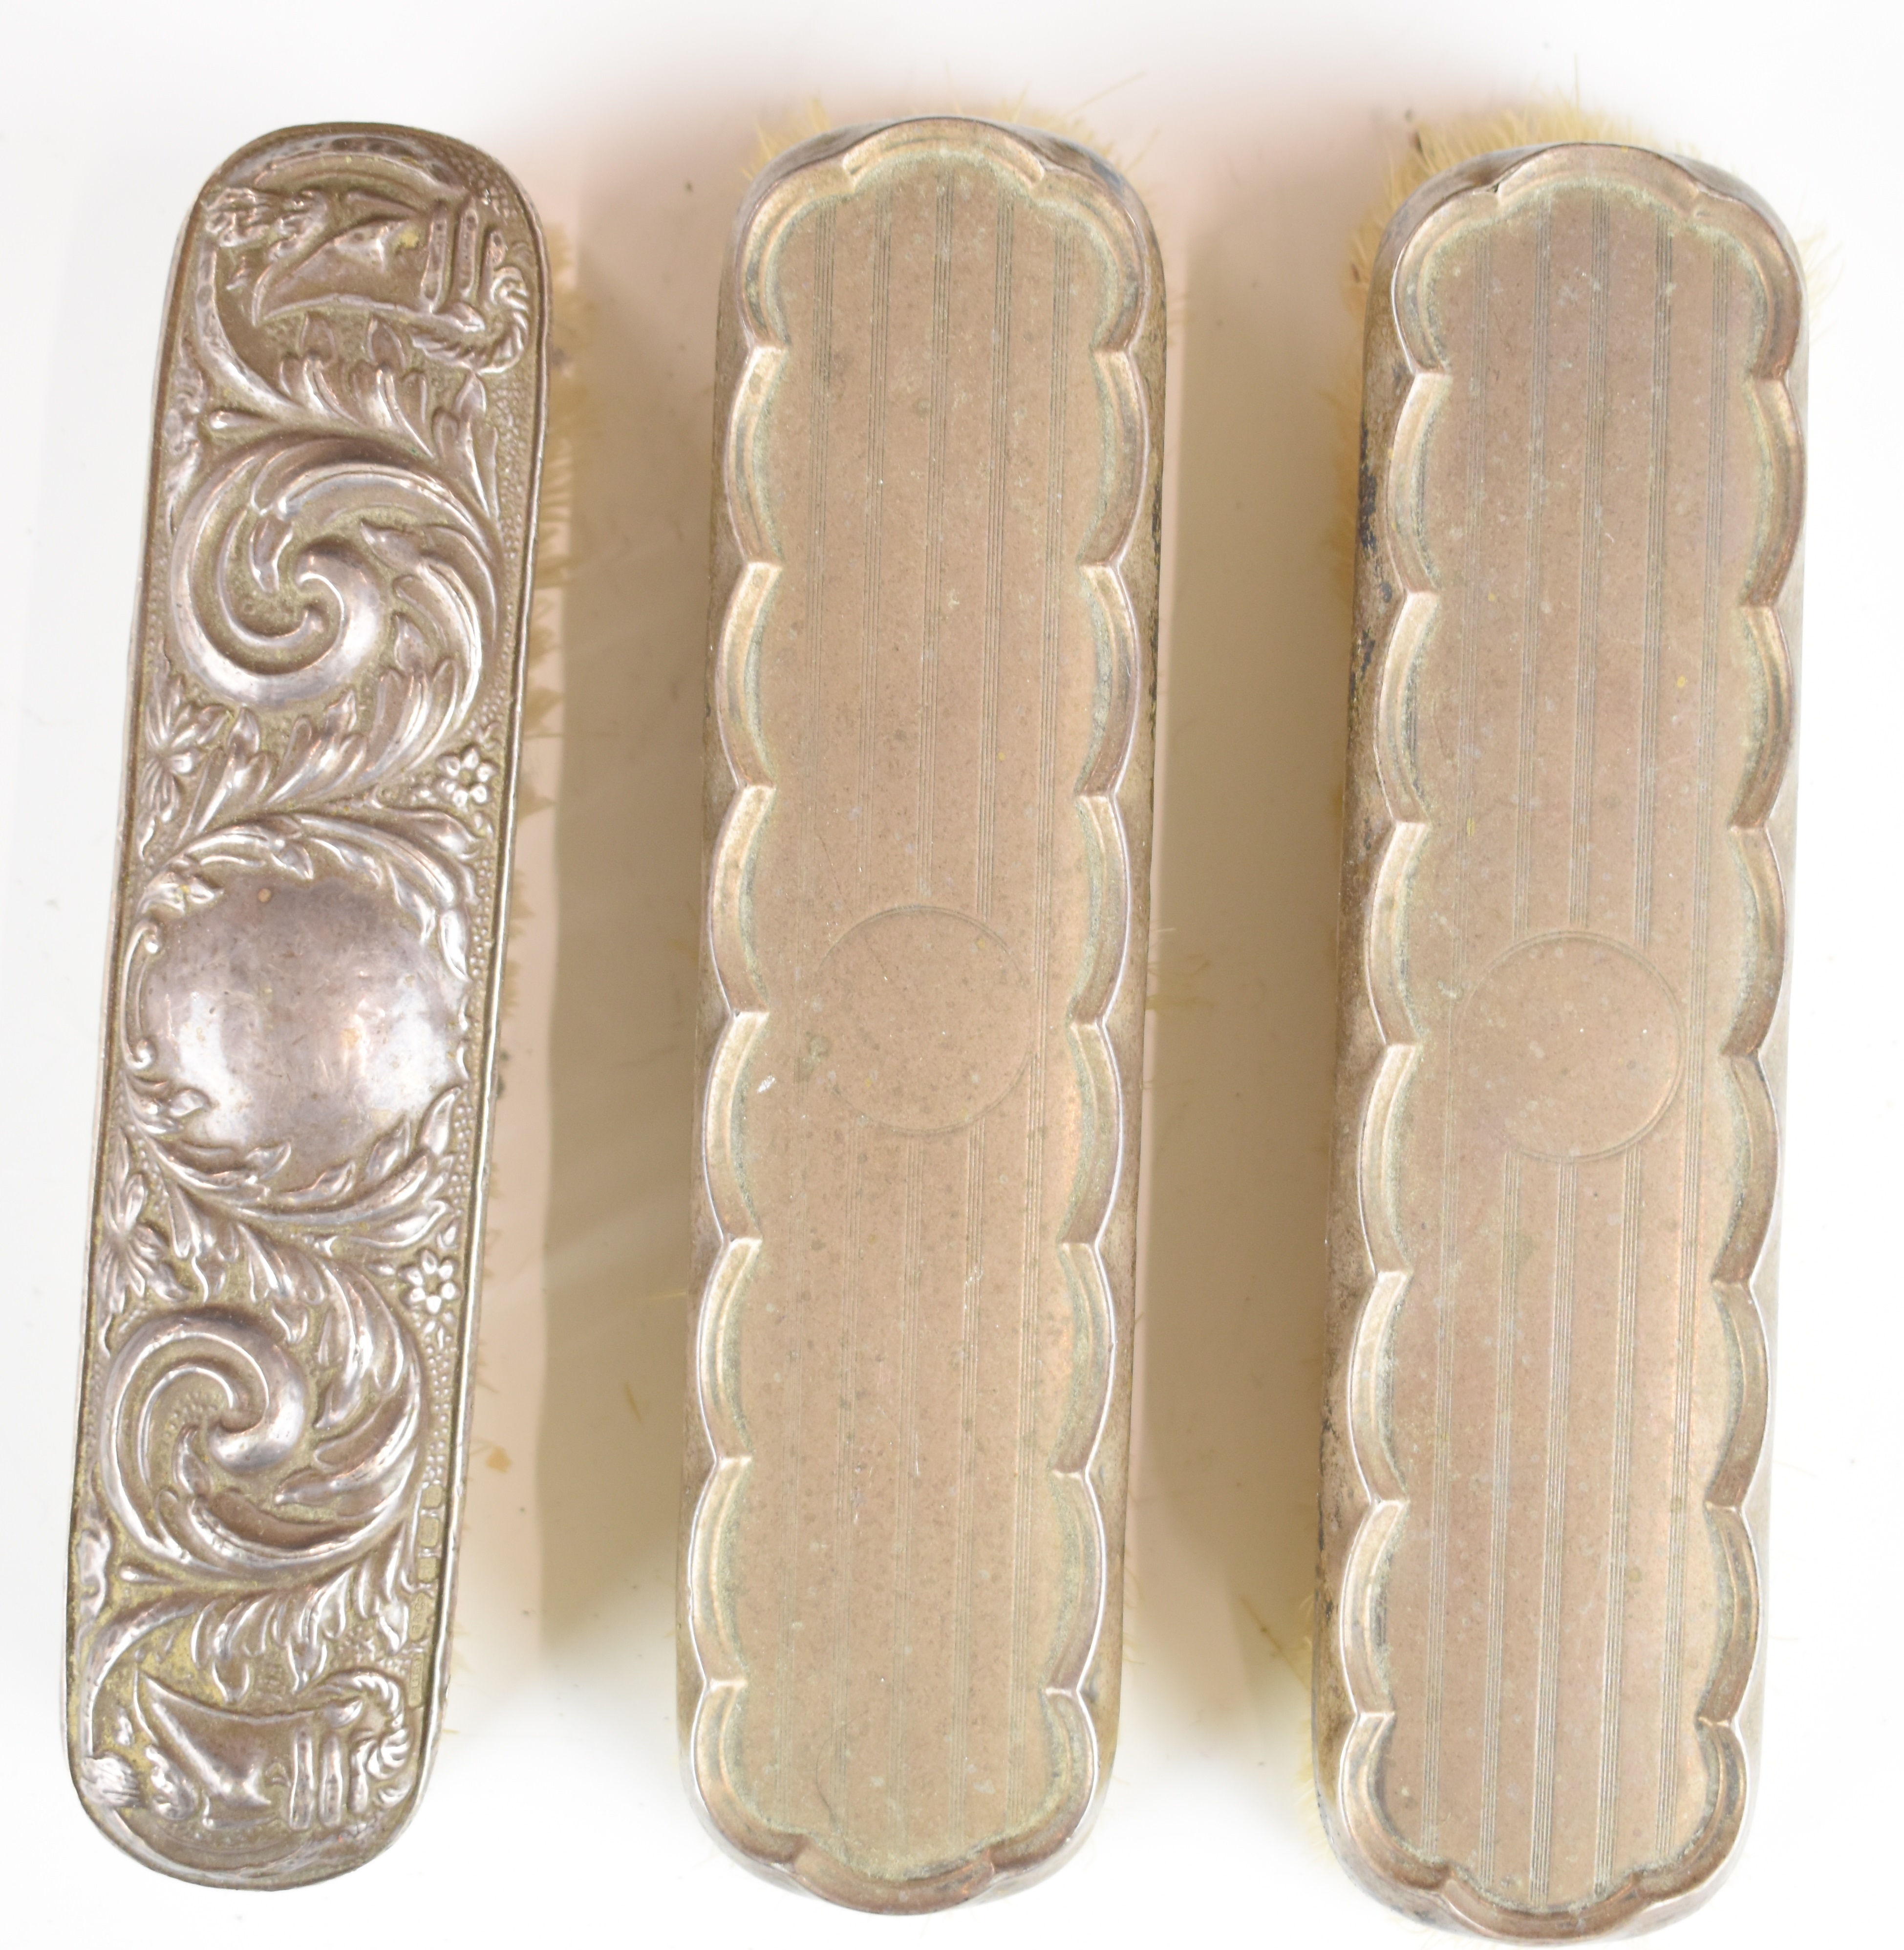 Hallmarked silver backed hand mirror and six various hallmarked silver backed brushes - Image 2 of 6